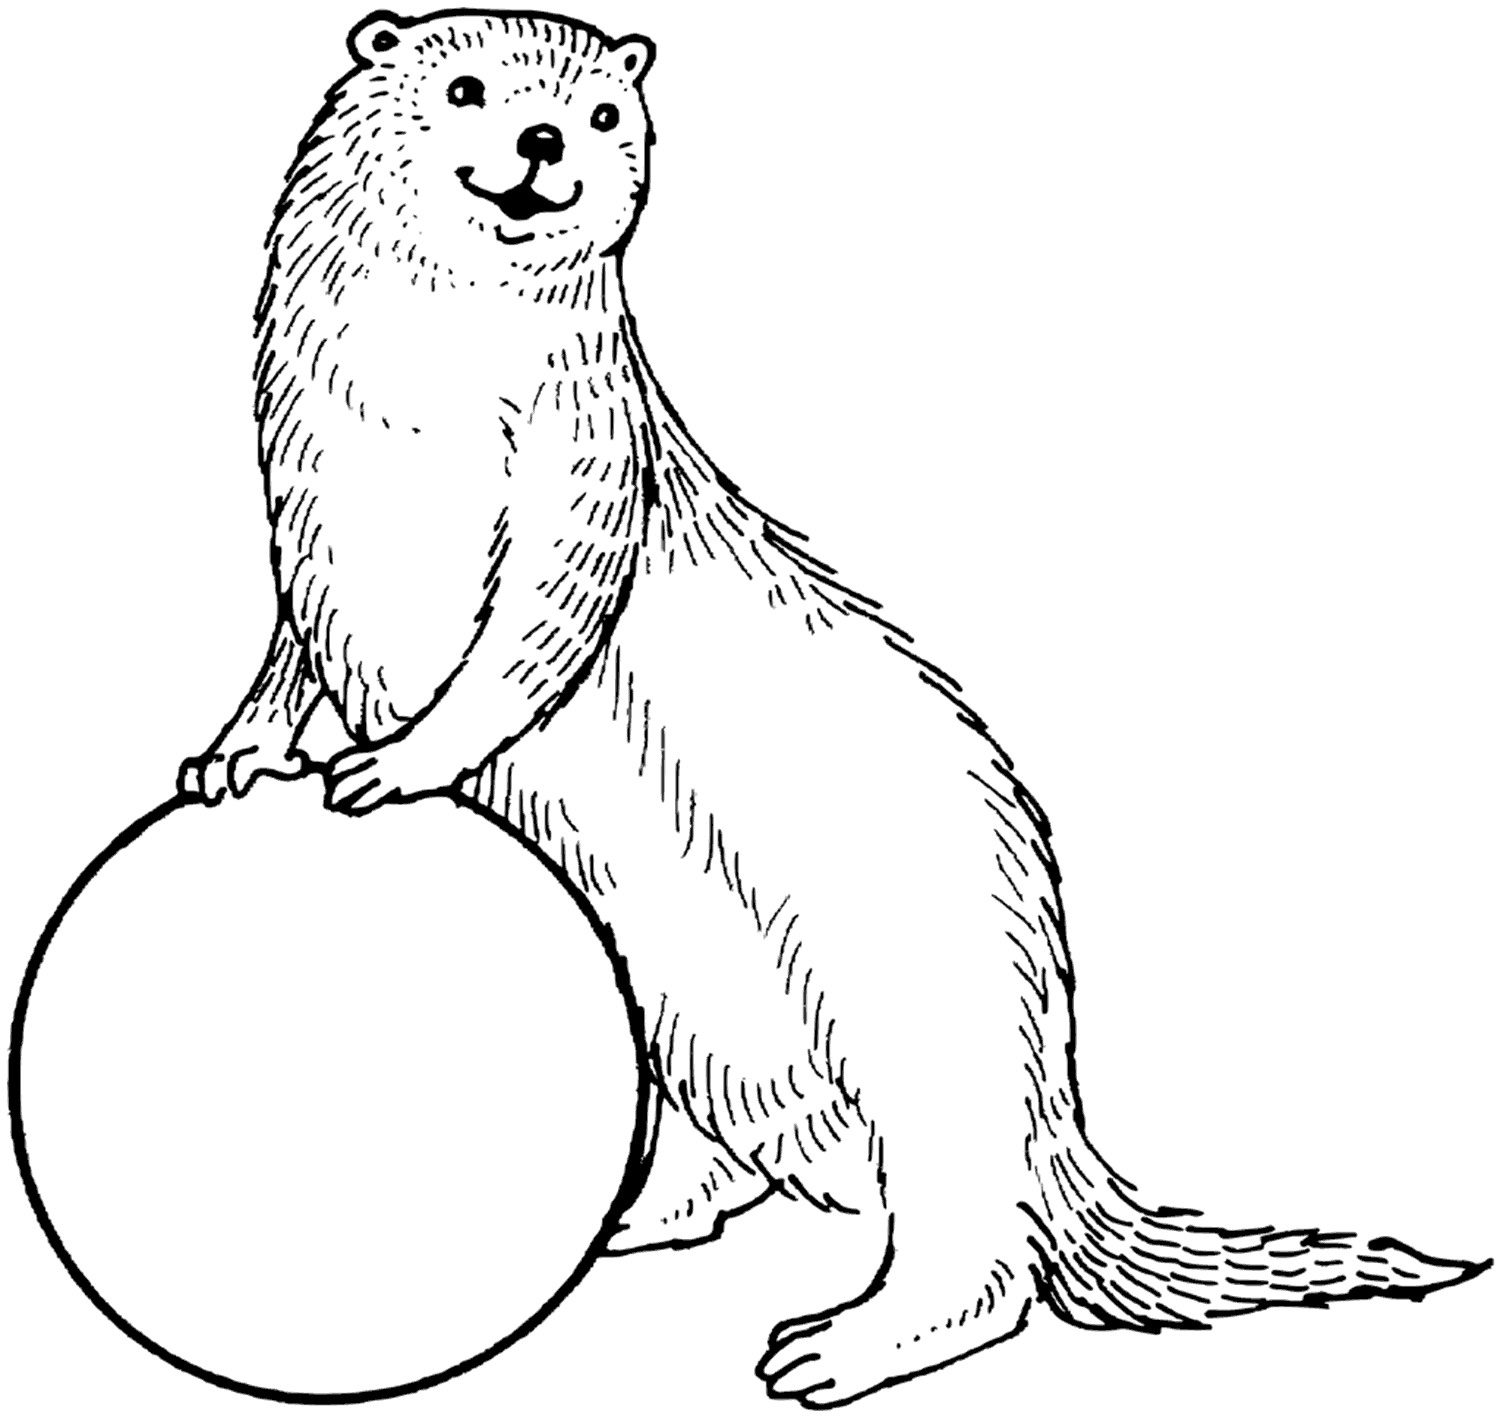 Otter With A Ball Coloring Page